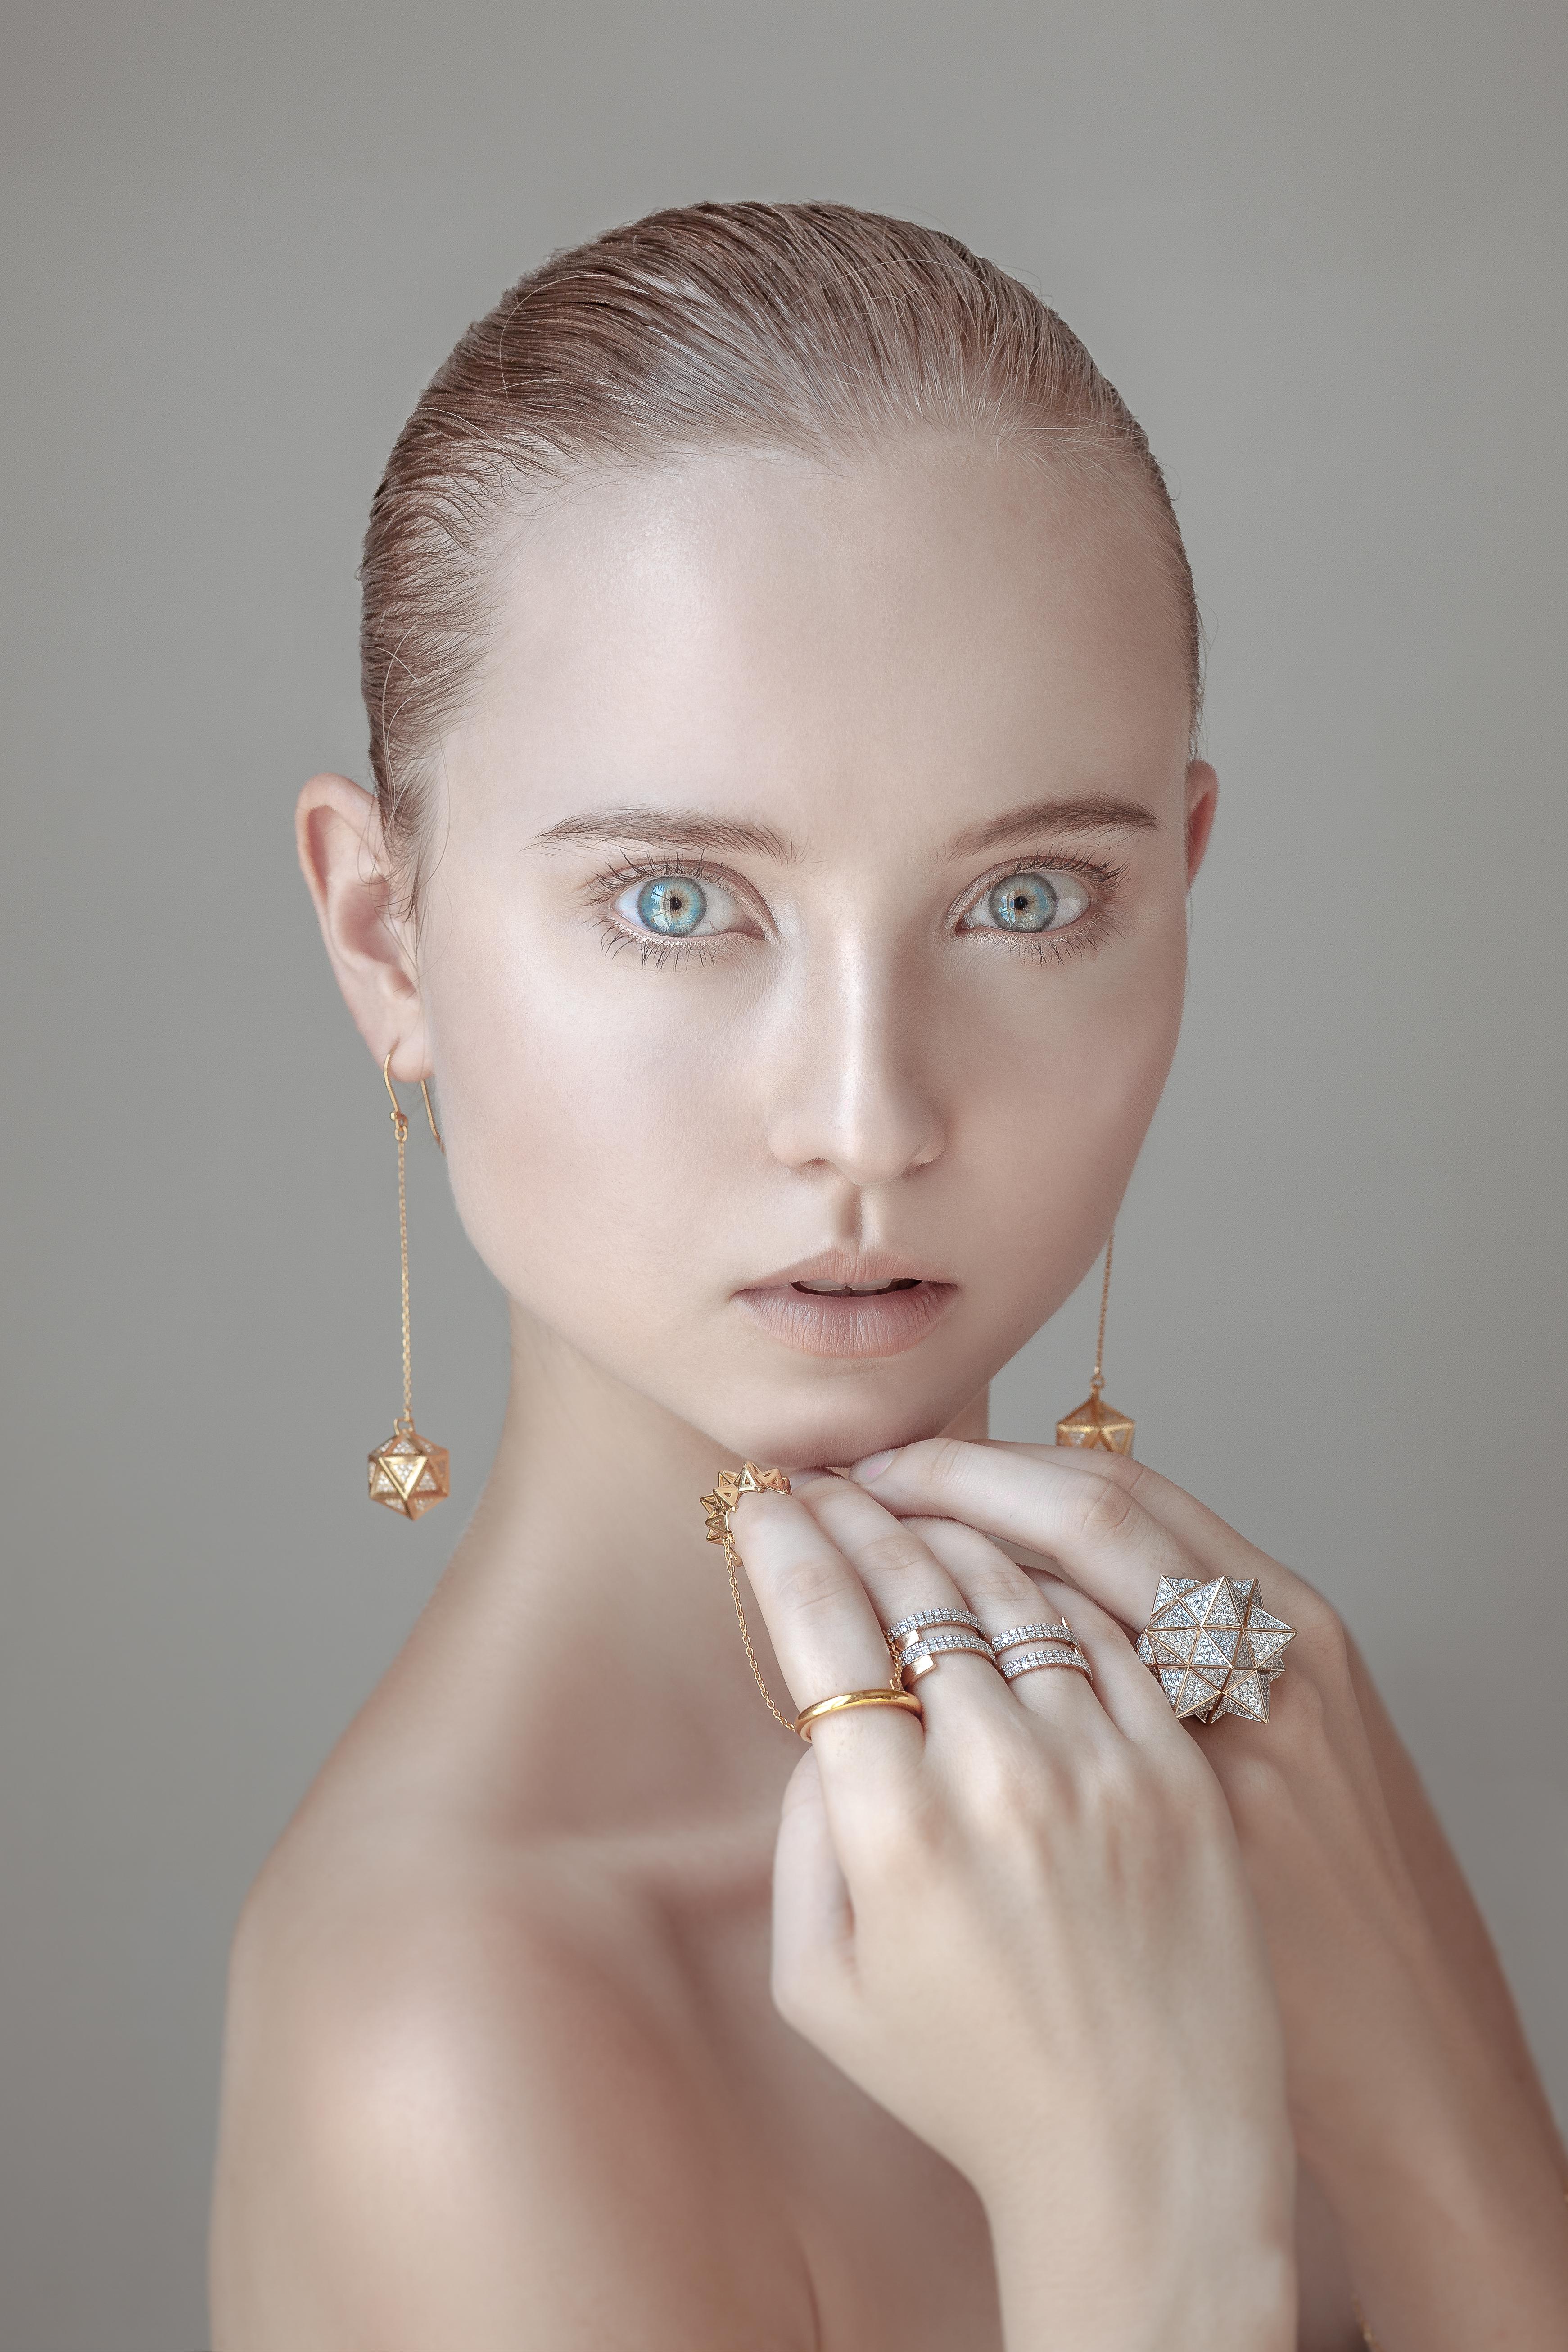 Inspired by sacred geometry and the Platonic solids, these Verahedra by John Brevard dangle earrings are created in 18K yellow gold with 240 round white diamonds at 1.0 mm each (1.2 carats total) and 2 round white diamonds at 2.0 mm each (0.07